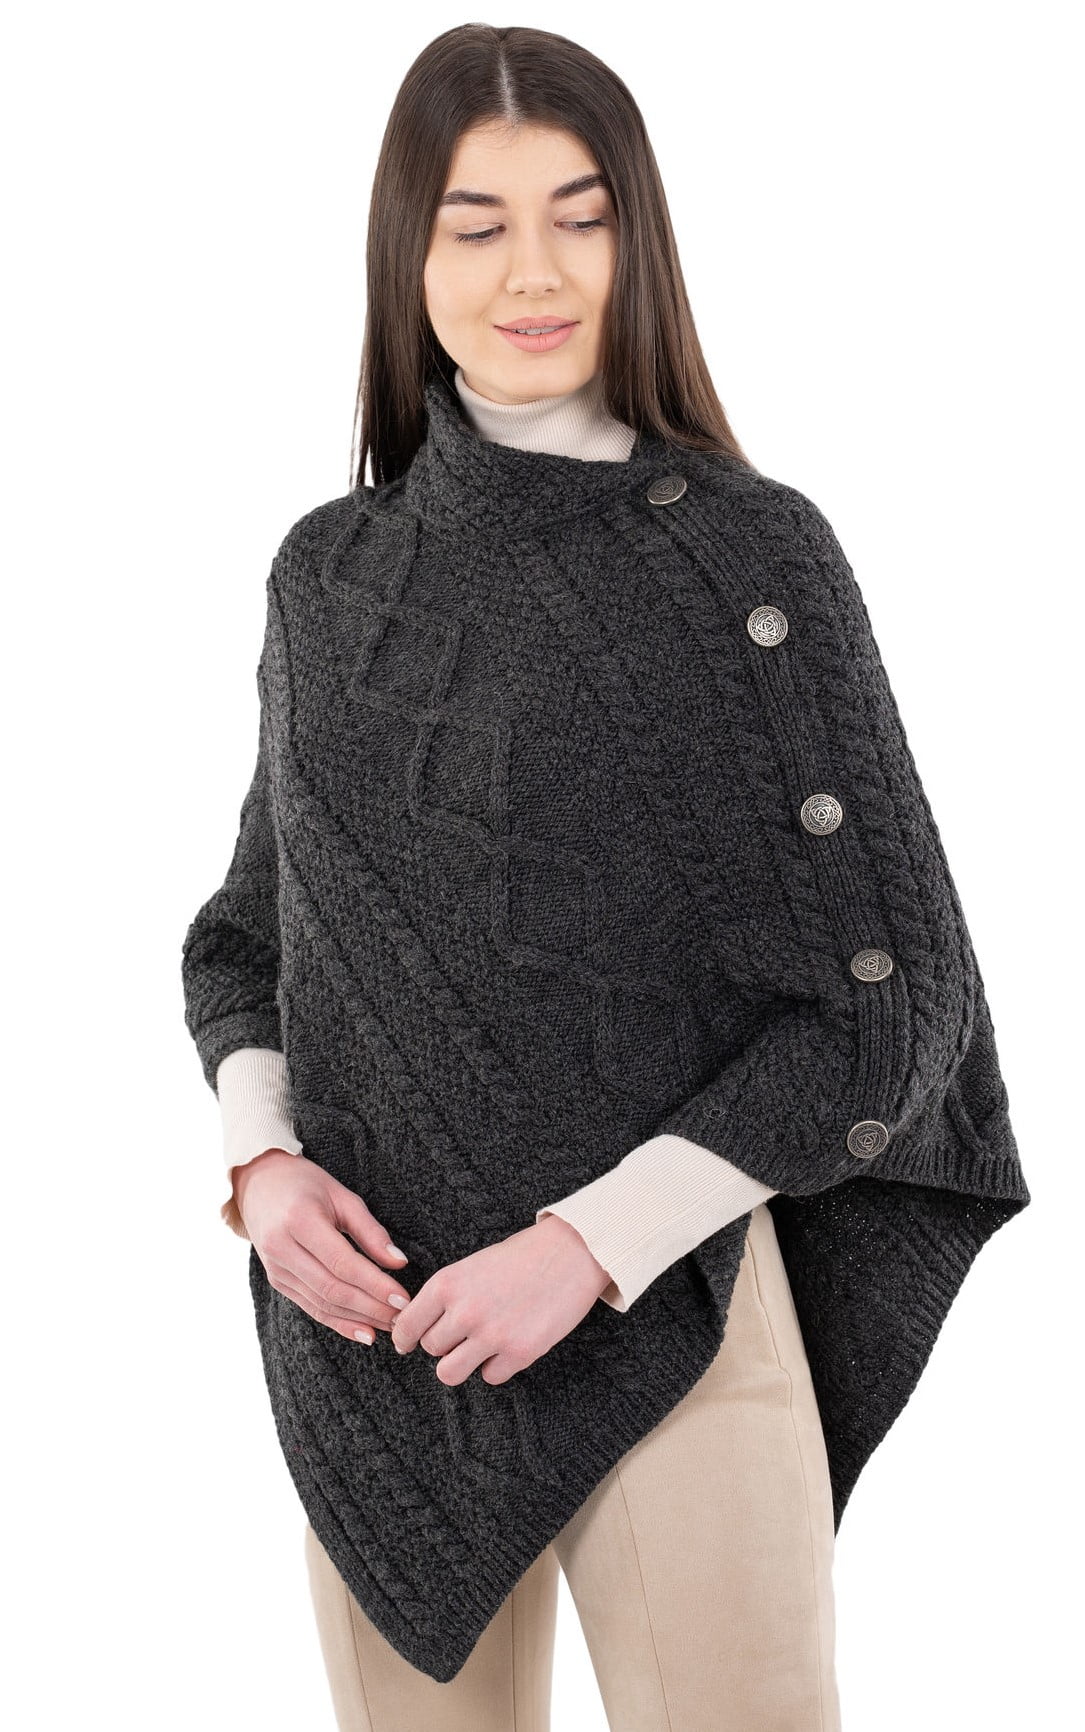 SAOL Aran Cable Knit Cowl Neck Poncho 100% Soft Merino Wool Women's Irish  Cape with Side Buttons from Ireland